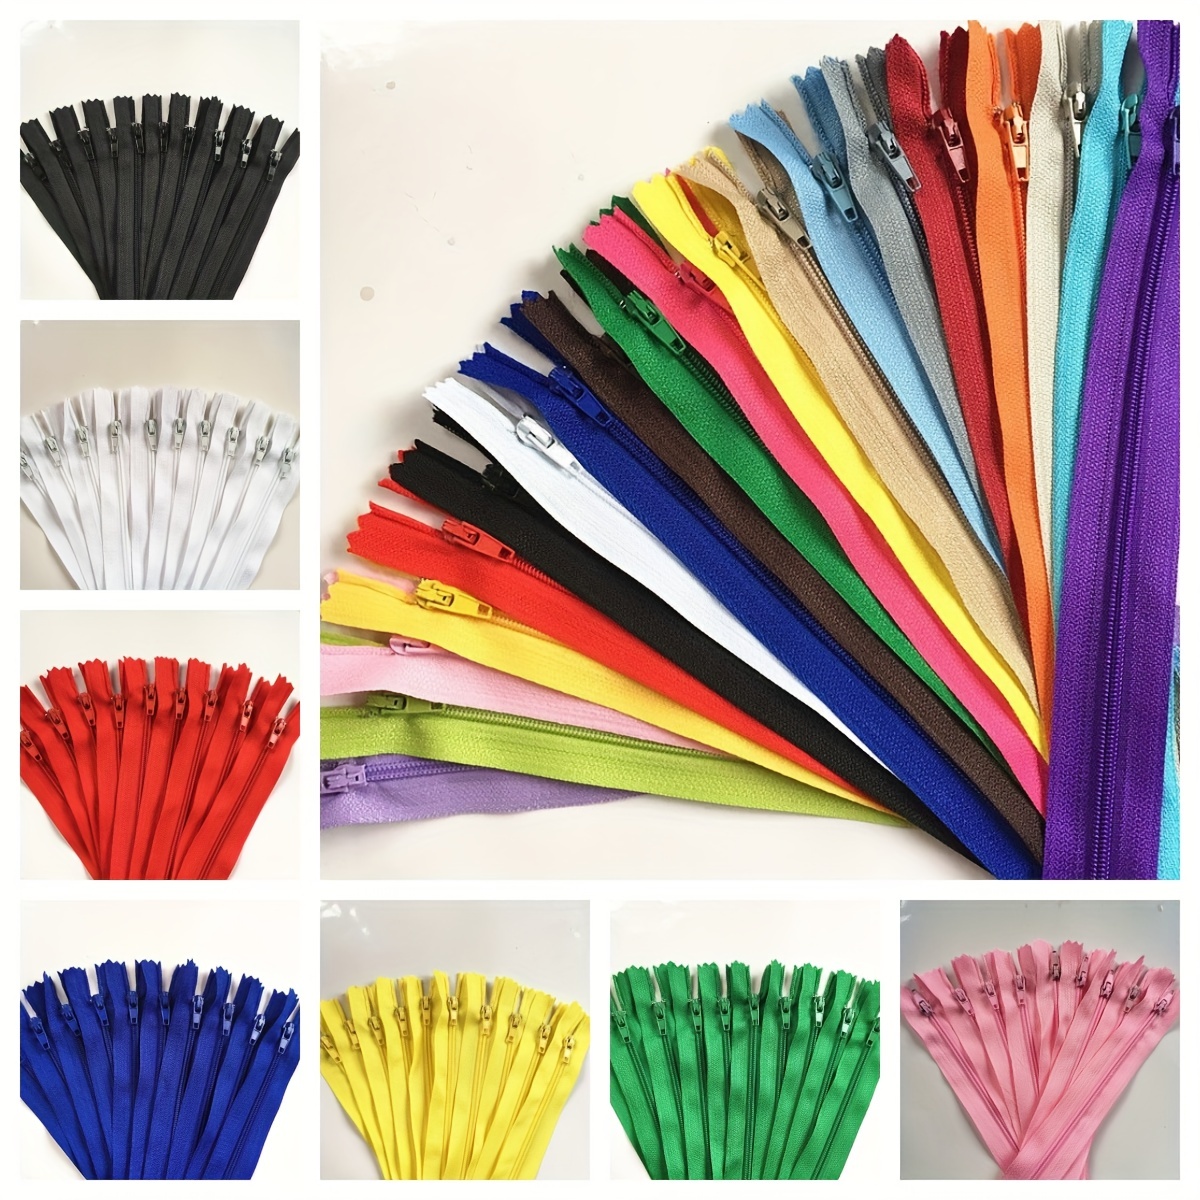 10pcs 20cm Nylon Coil Zippers for Tailor Sewing Crafts Nylon Zippers Bulk  40 Colors zipper slider pull sewing accessories - AliExpress